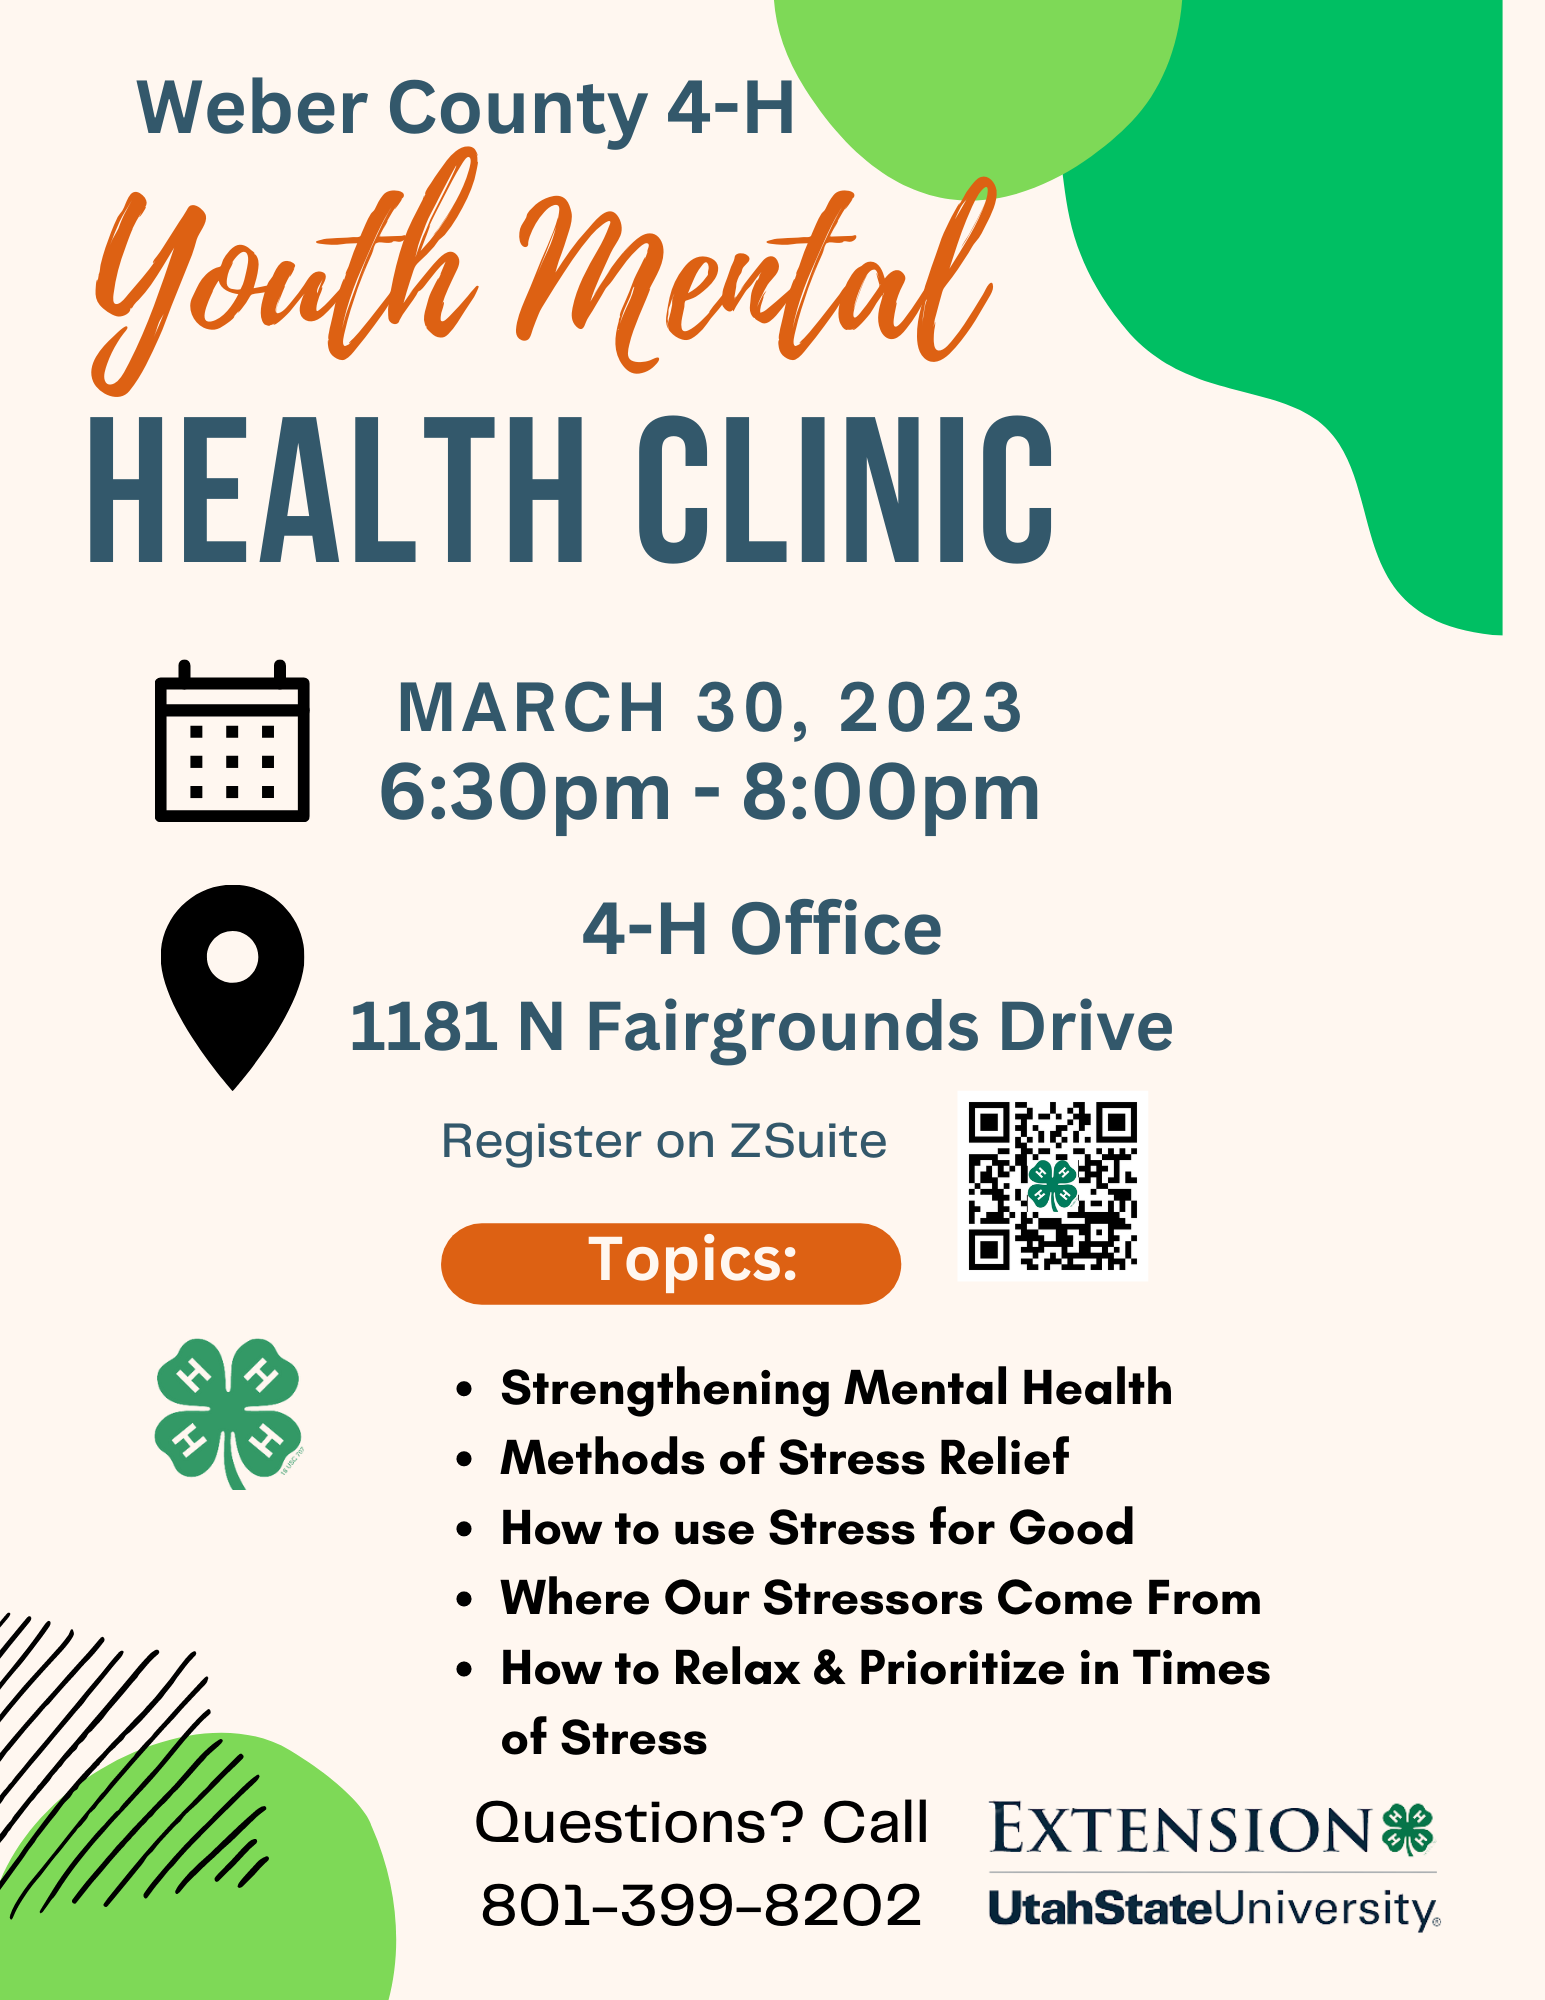 4-H Youth Mental Health Clinic